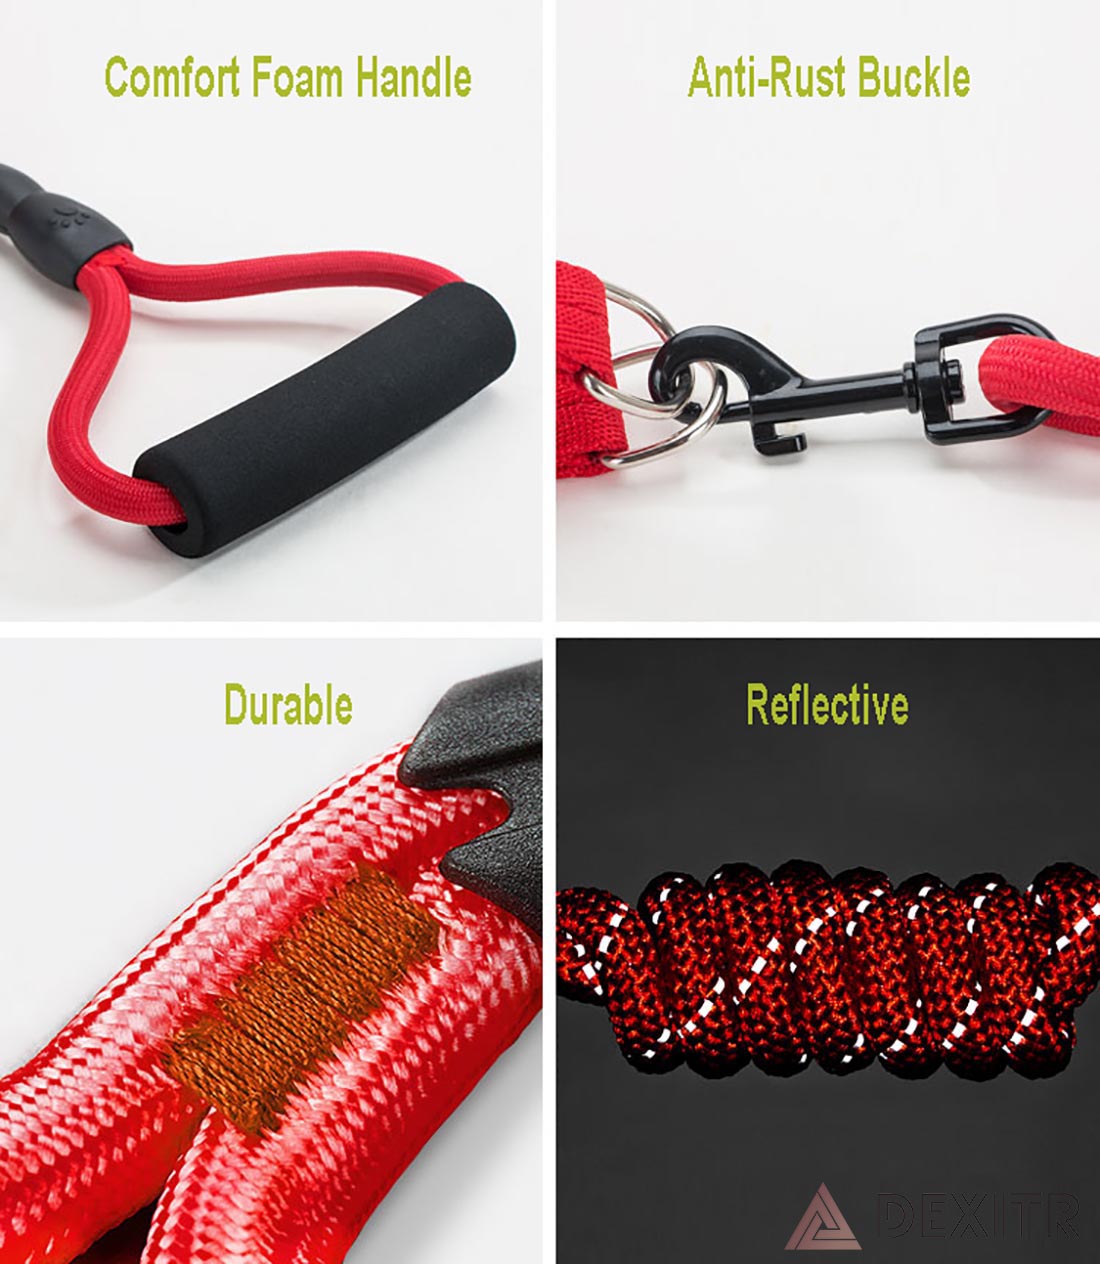 Reflective Rope Dog Leash Elastic with Comfort Foam Grip Handle Padded Nylon Strong Adjustable Chest Strap Durable 360° Swivel Round Traction Rope Walking & Training Detachable Pet Safety Lead Climbing for Small Medium and Large Dogs